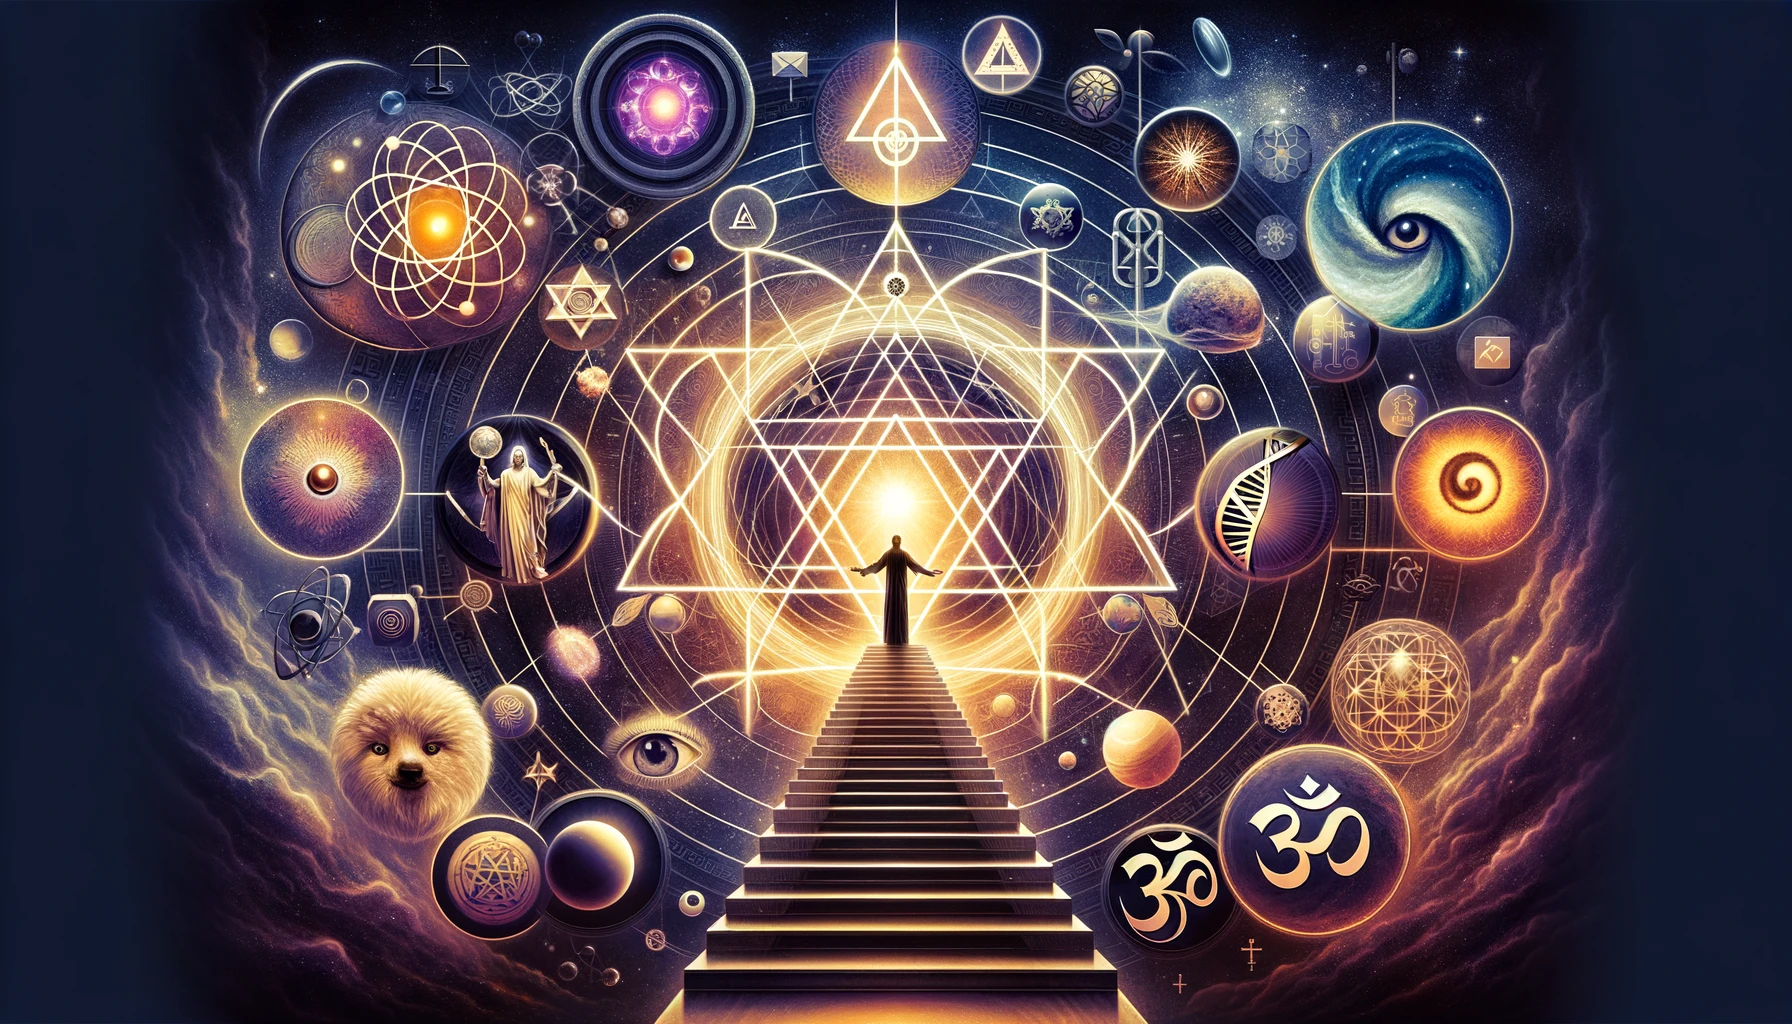 Theosophy as an esoteric framework, merging scientific symbols, philosophical imagery, and religious icons into a cohesive visual representation of unity and the search for deeper existential truths.